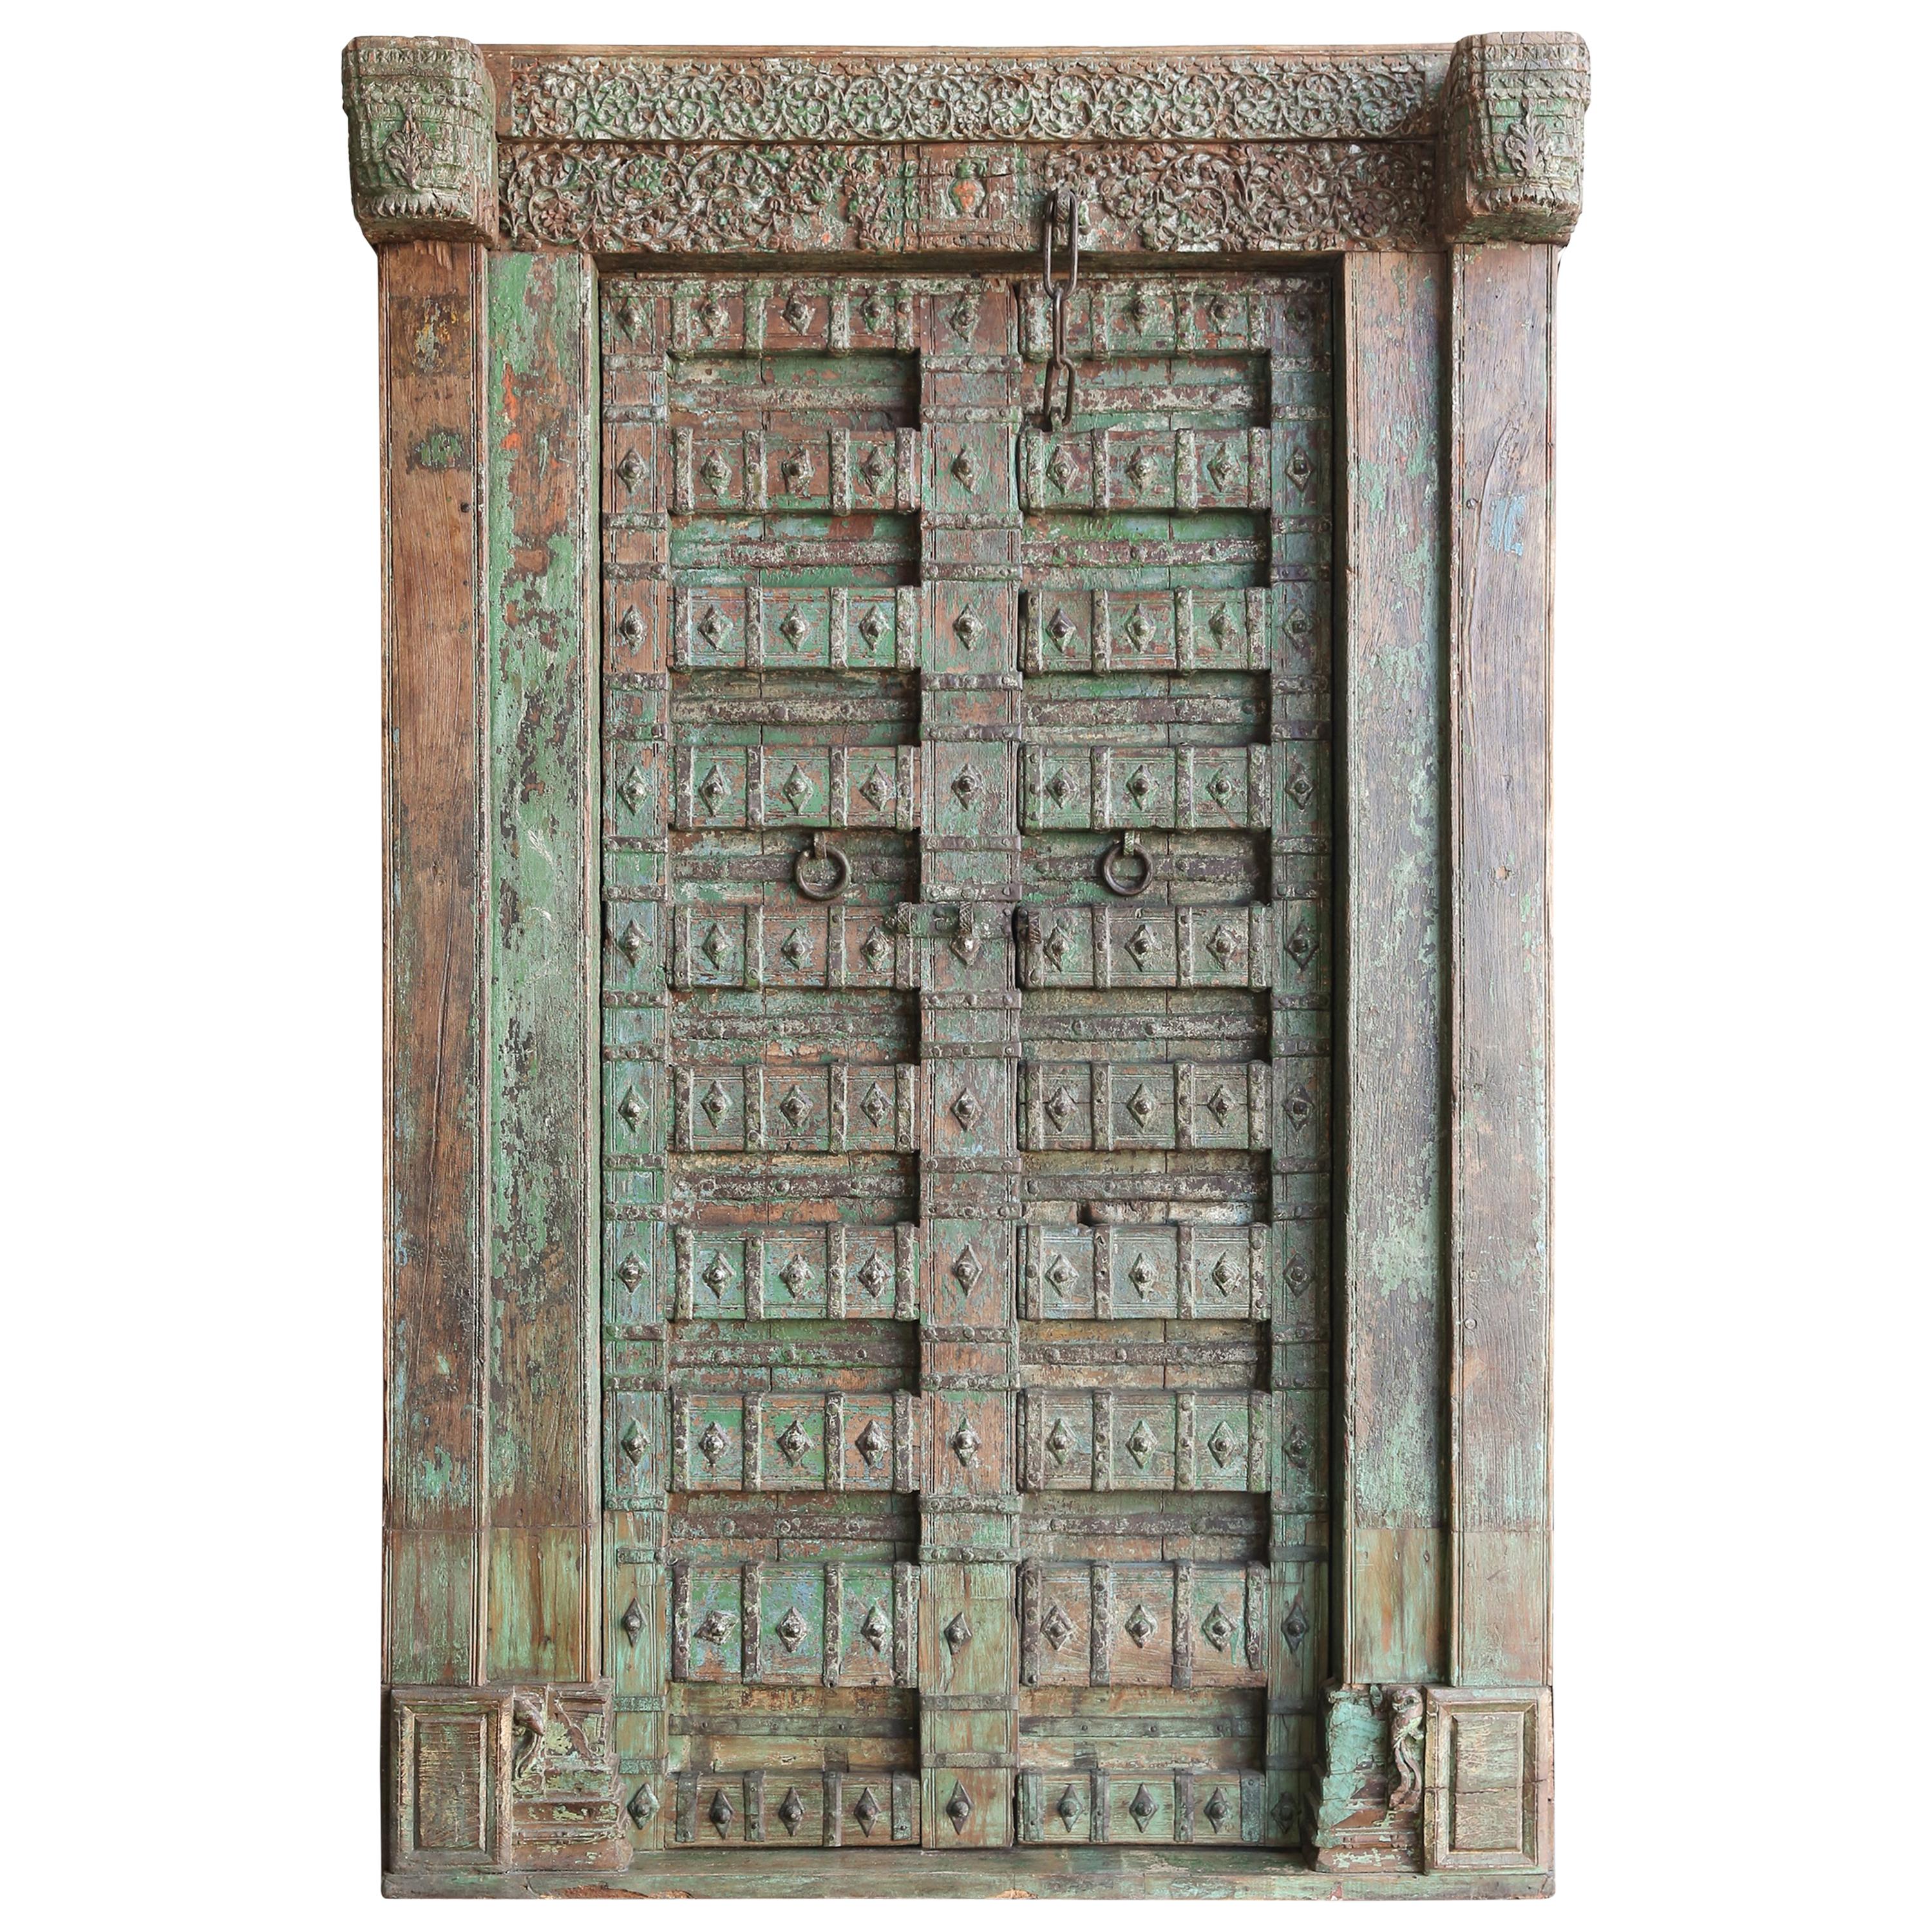 Early 19th Century Solid Teak Wood Highly Carved Entry Doors of a Village Temple For Sale